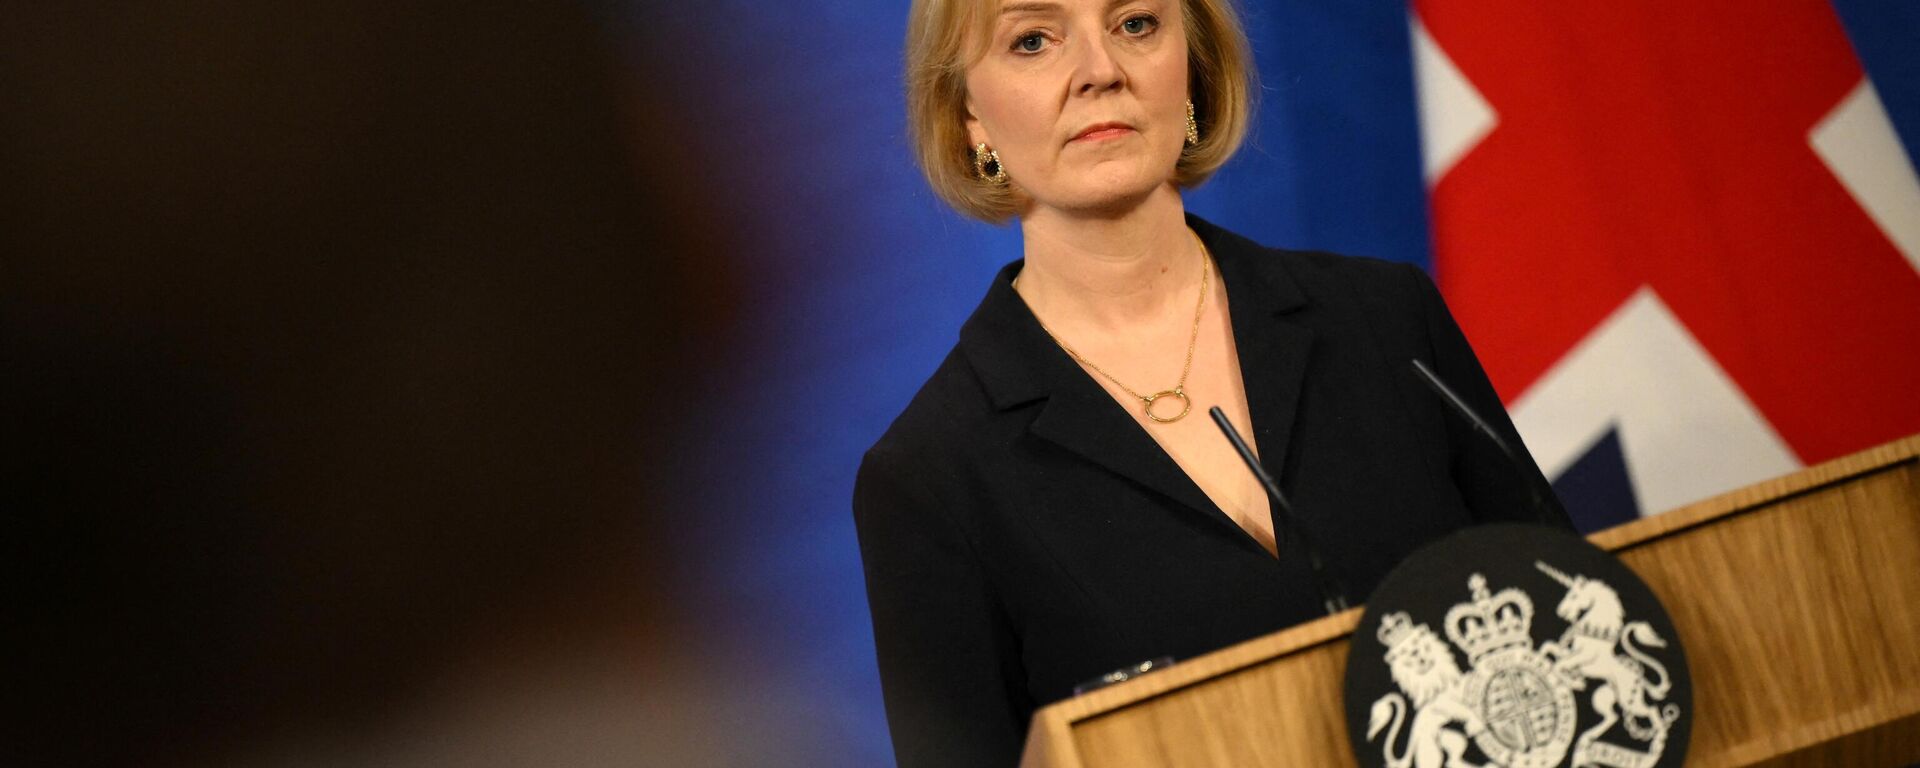 Britain's Prime Minister Liz Truss holds a press conference in the Downing Street Briefing Room in central London on October 14, 2022. - Sputnik International, 1920, 21.10.2022